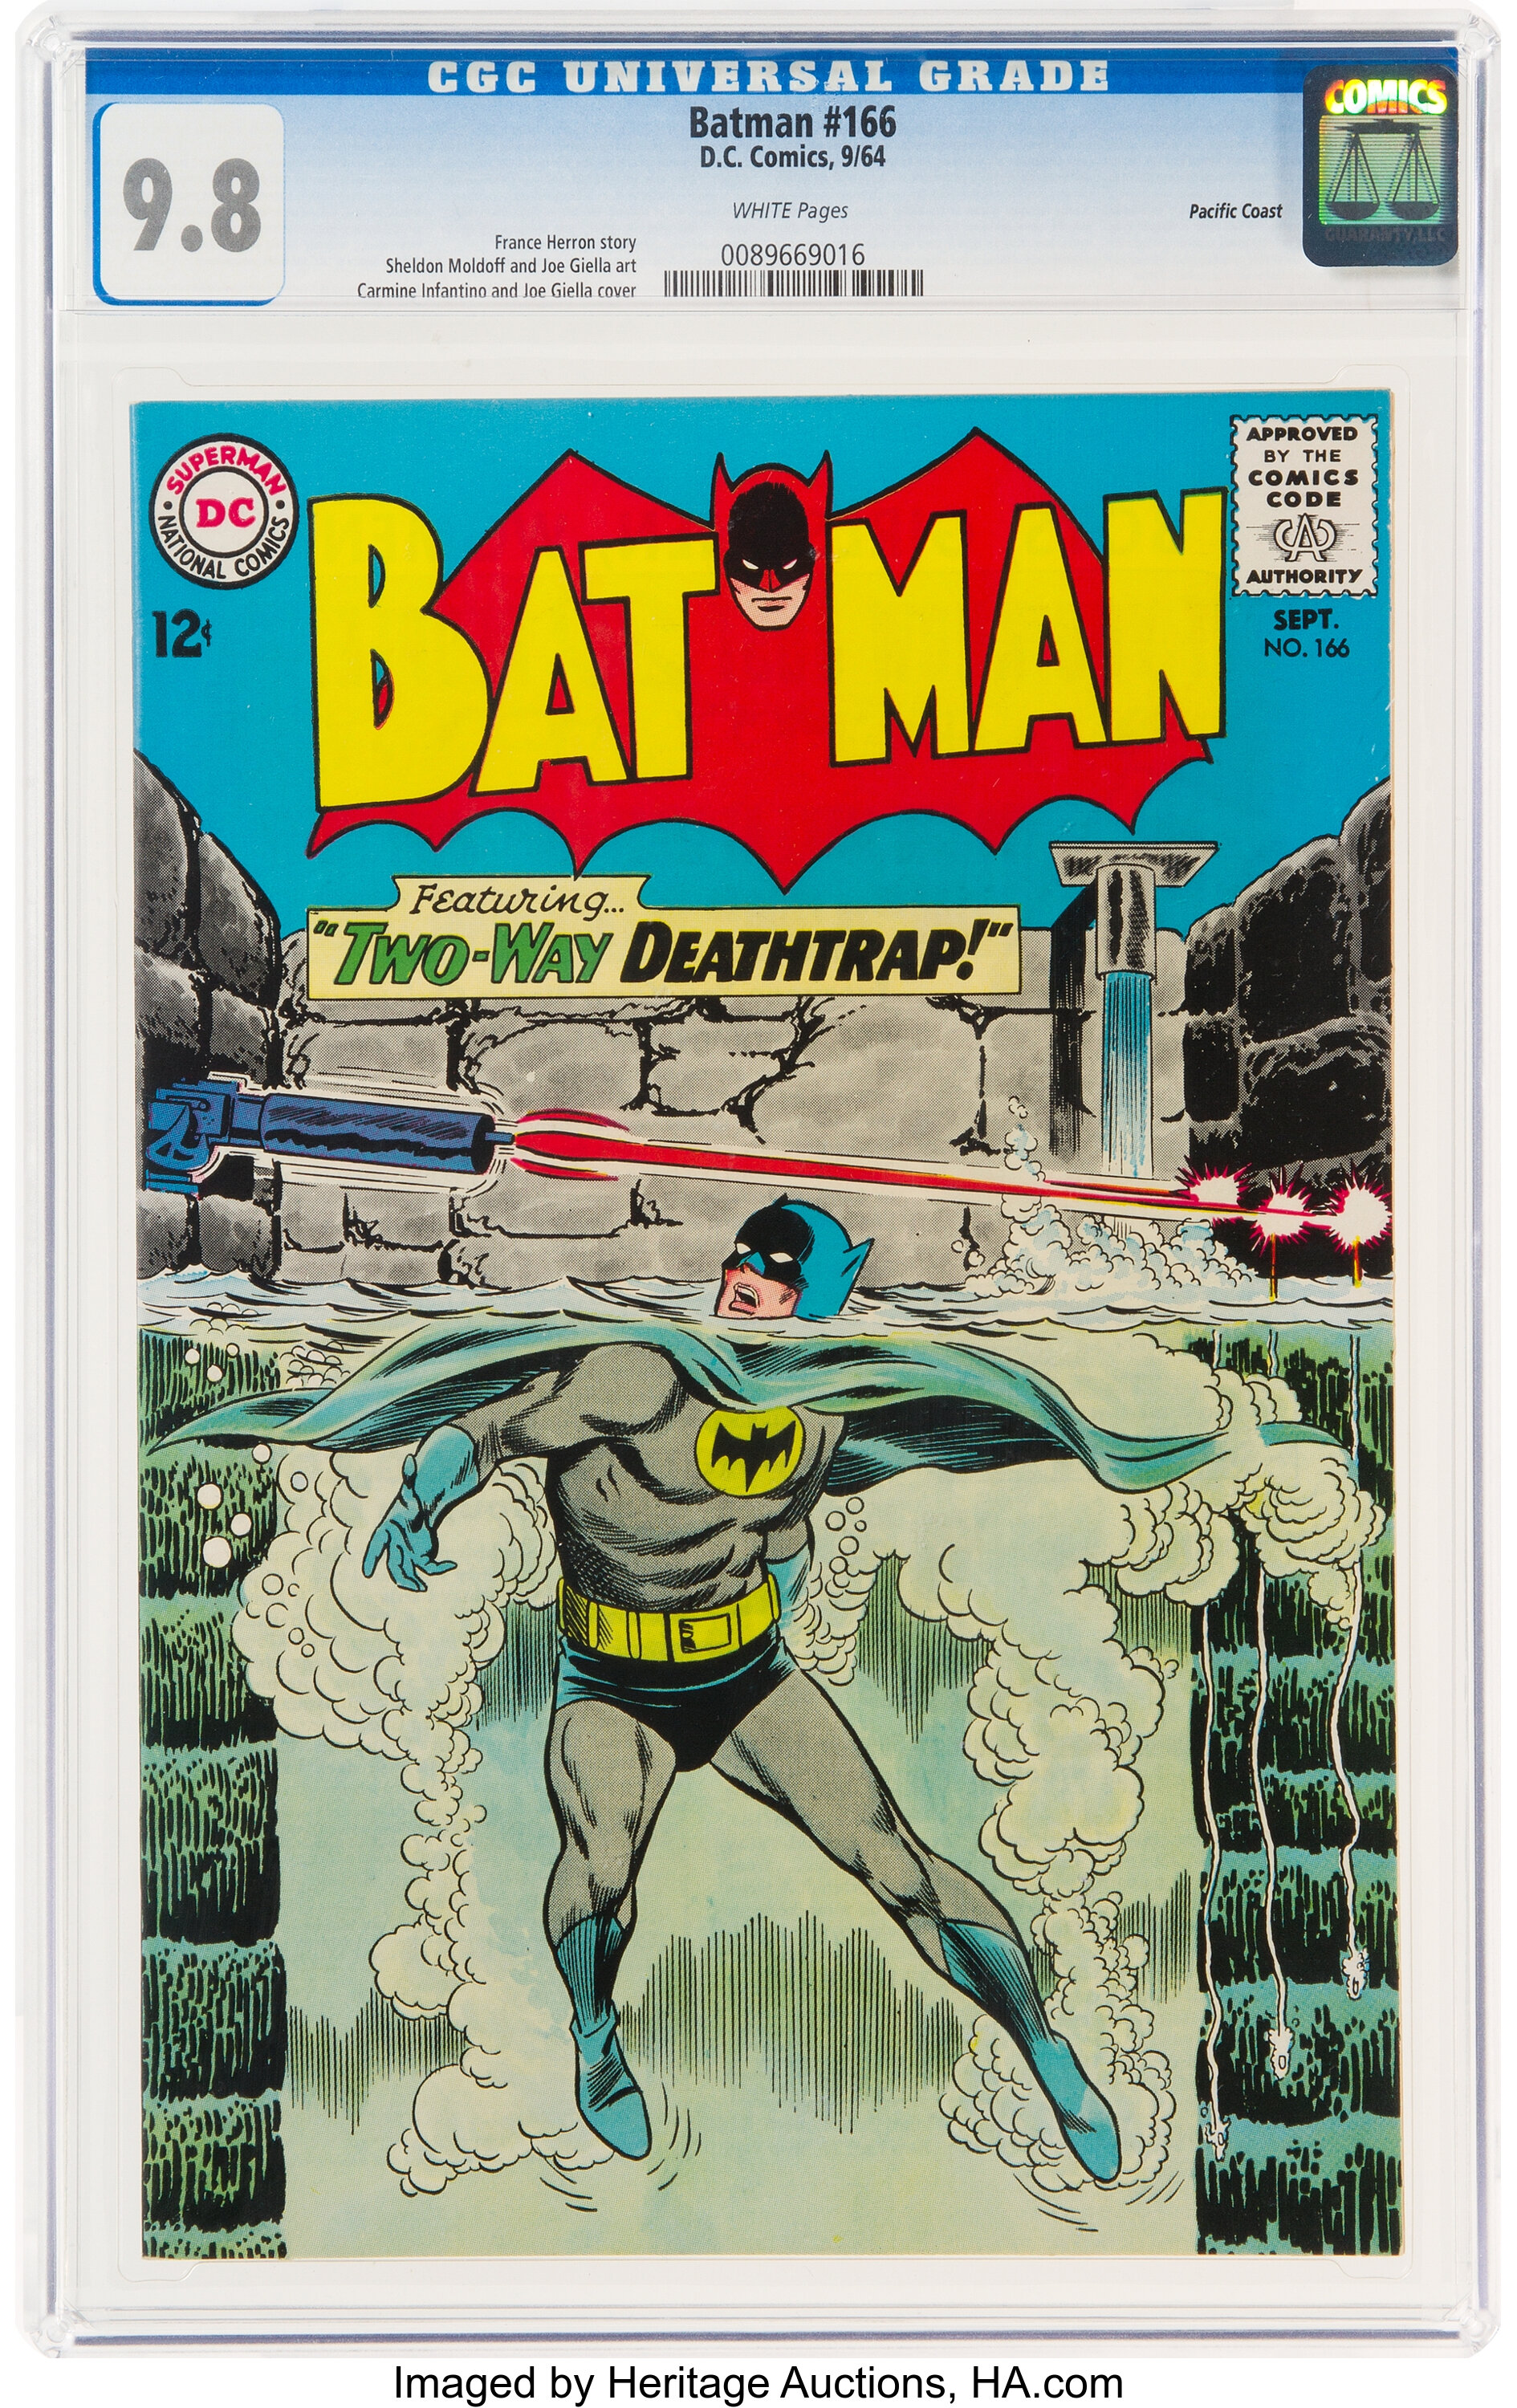 How Much Is Batman #166 Worth? Browse Comic Prices | Heritage Auctions